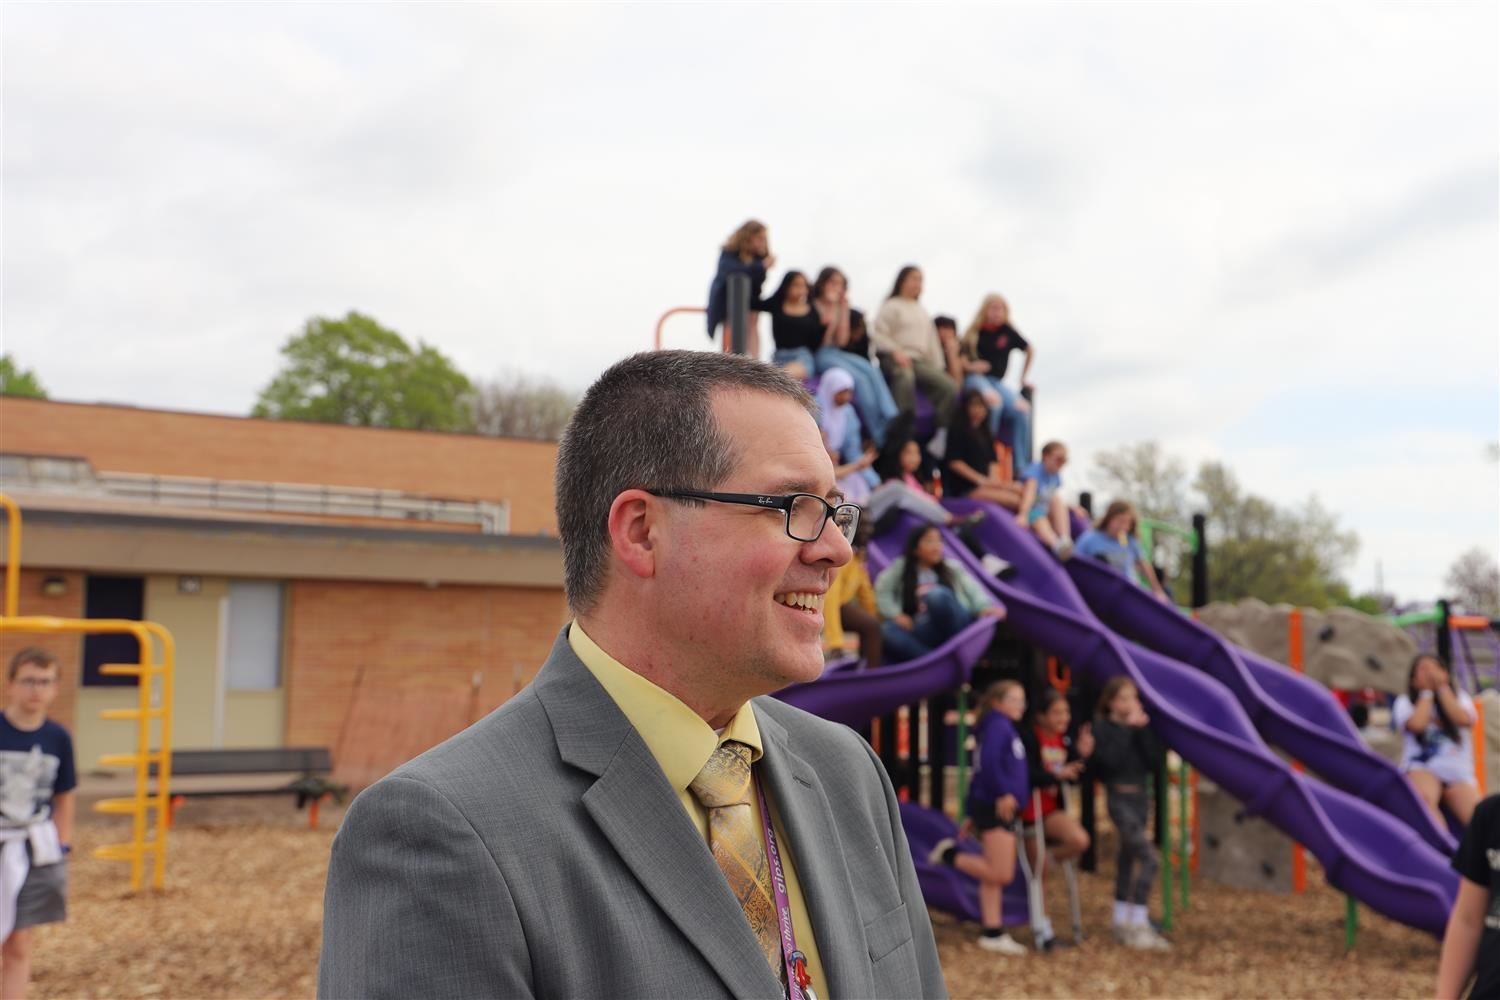 Mr. Balcom smiling by the Newell Playground with students.